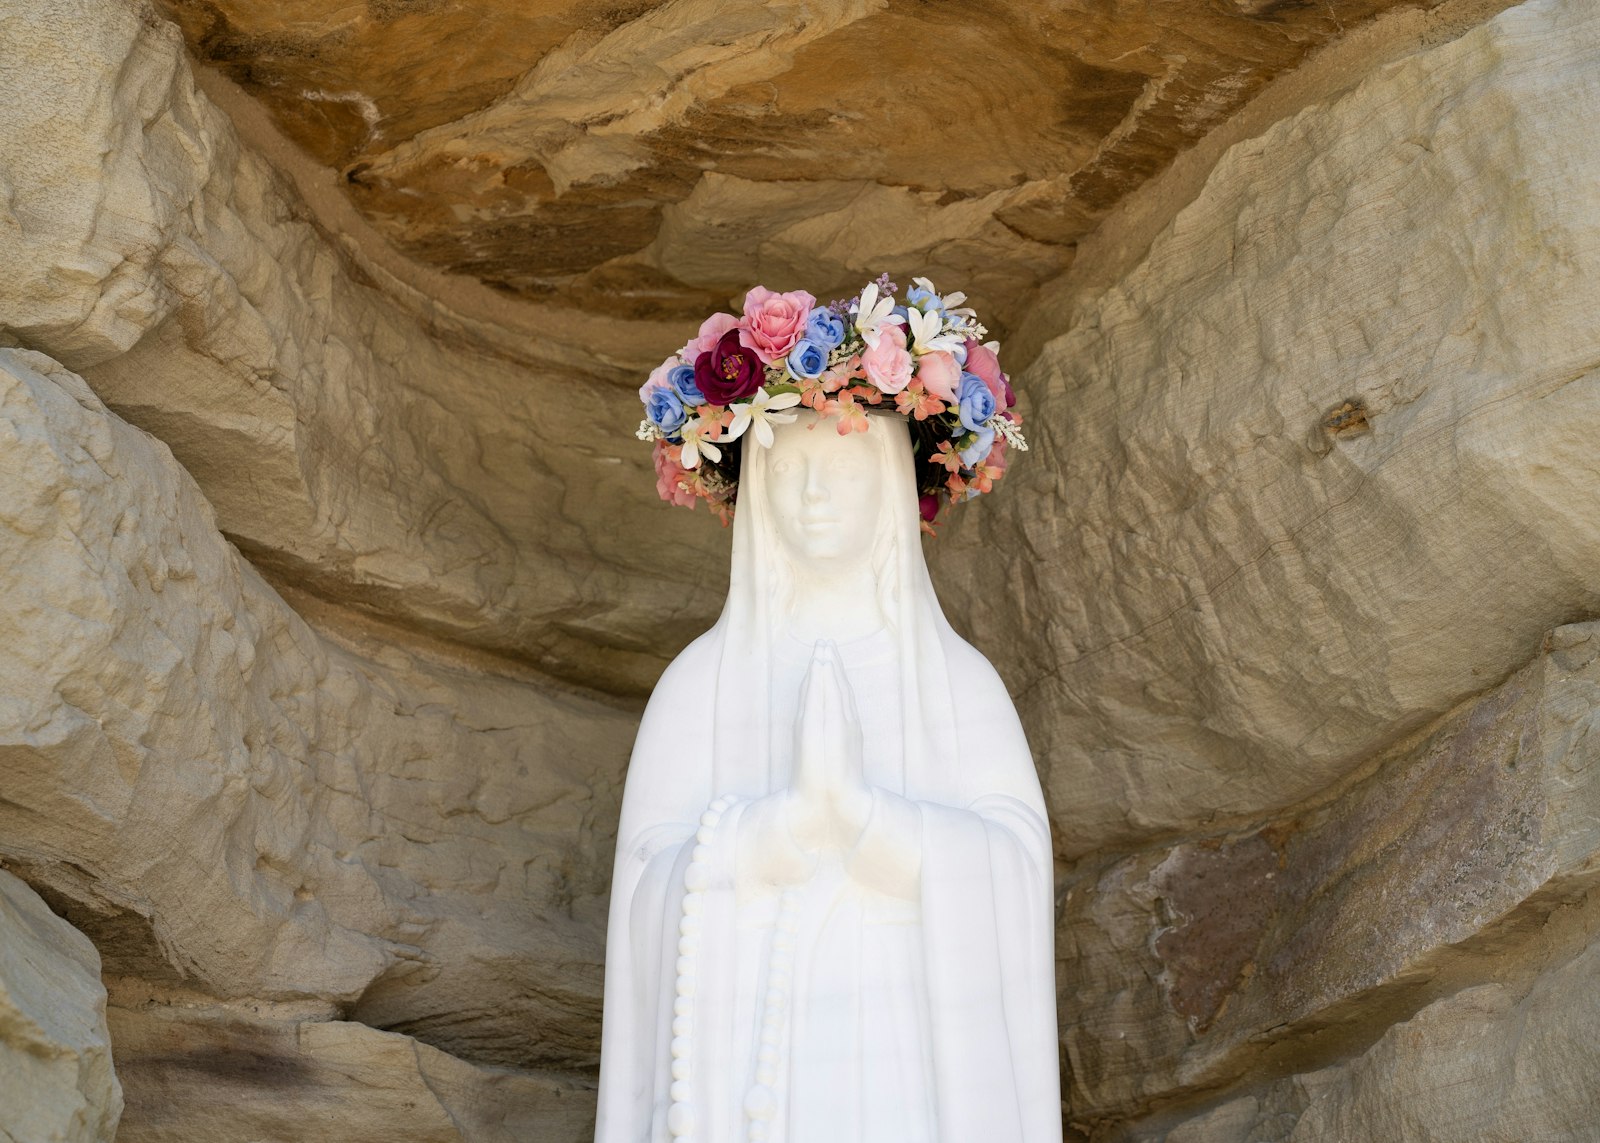 Archbishop Vigneron instructed that the alabaster statue of Our Lady of Lourdes be reflective of St. Bernadette Soubirous's description of her face.